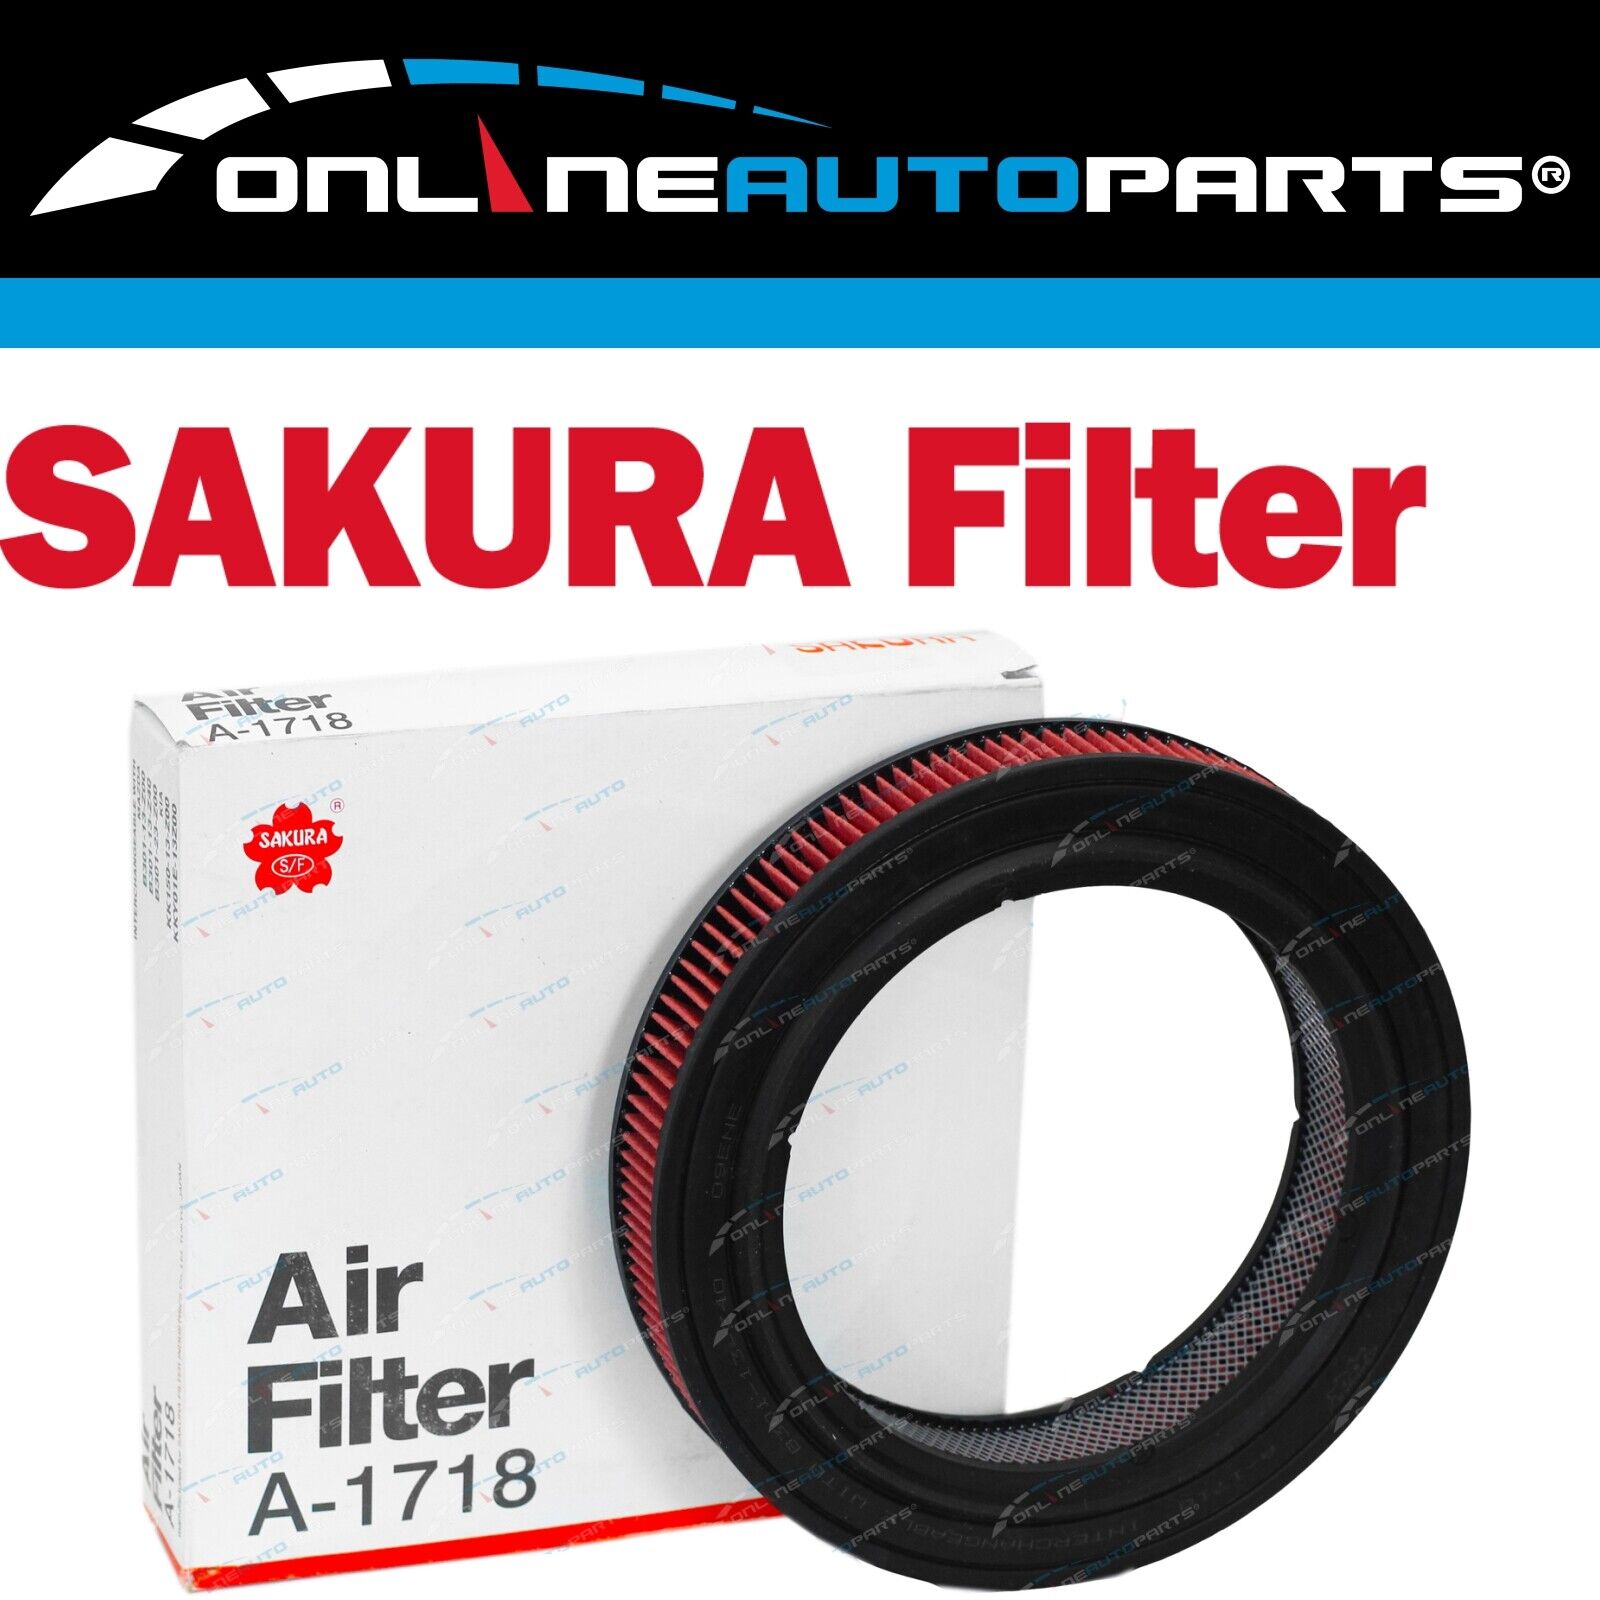 Sakura Air Filter Cleaner for Ford Festiva WA 4cyl B3 1.3L Engine 1991 to 1994